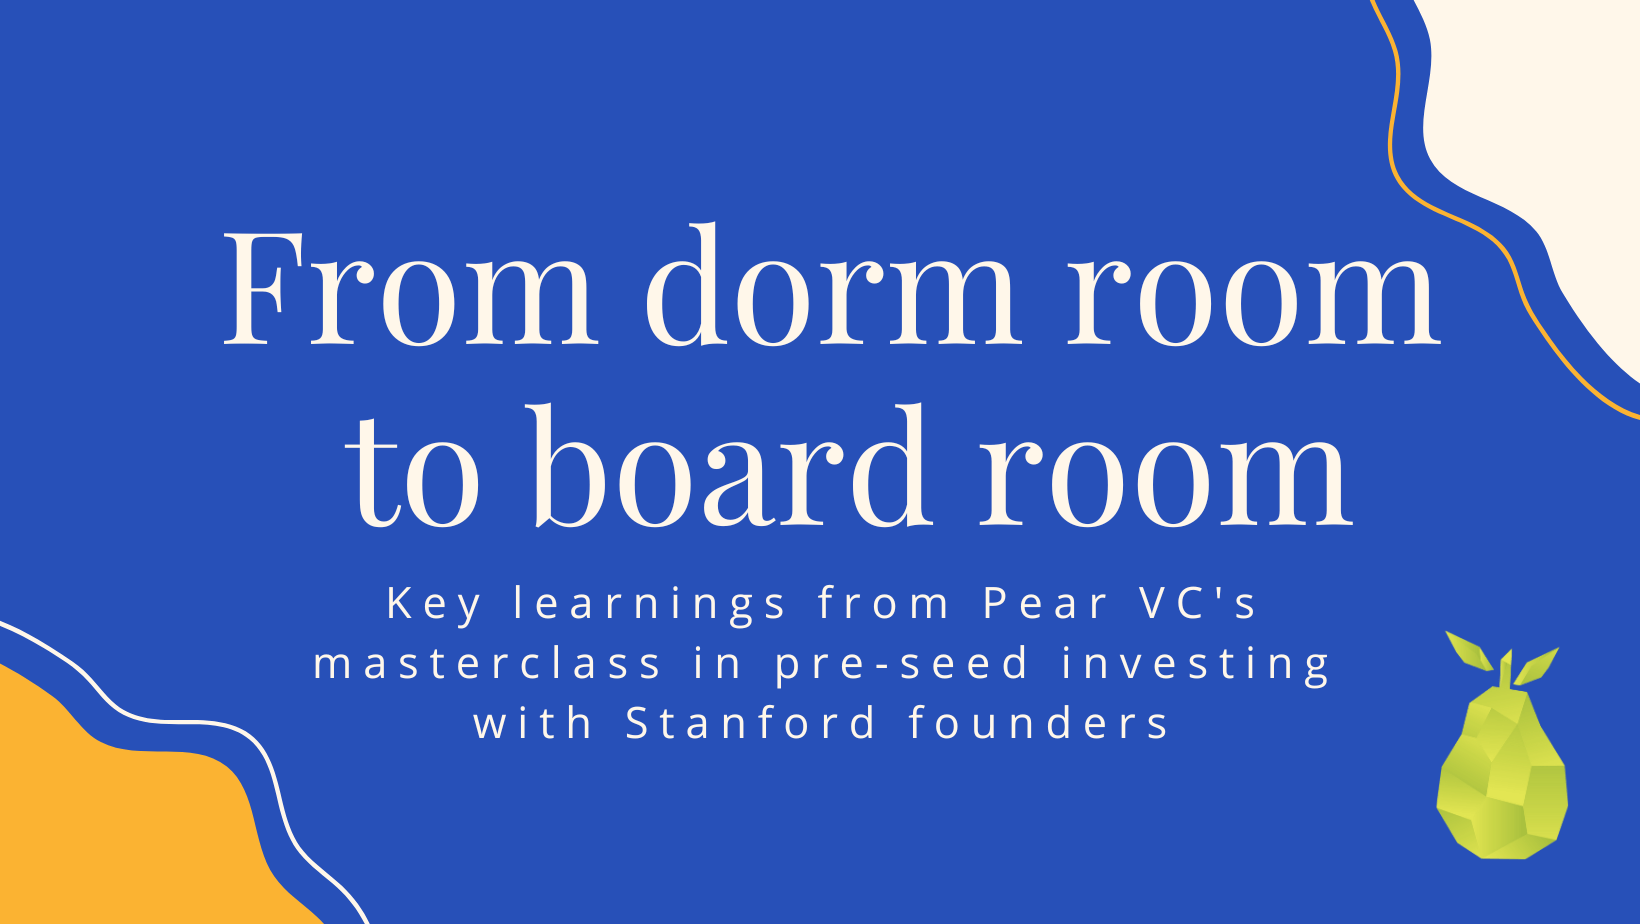 resources Dorm room to board room: key learnings from Pear VC’s masterclass in pre-seed investing with Stanford founders